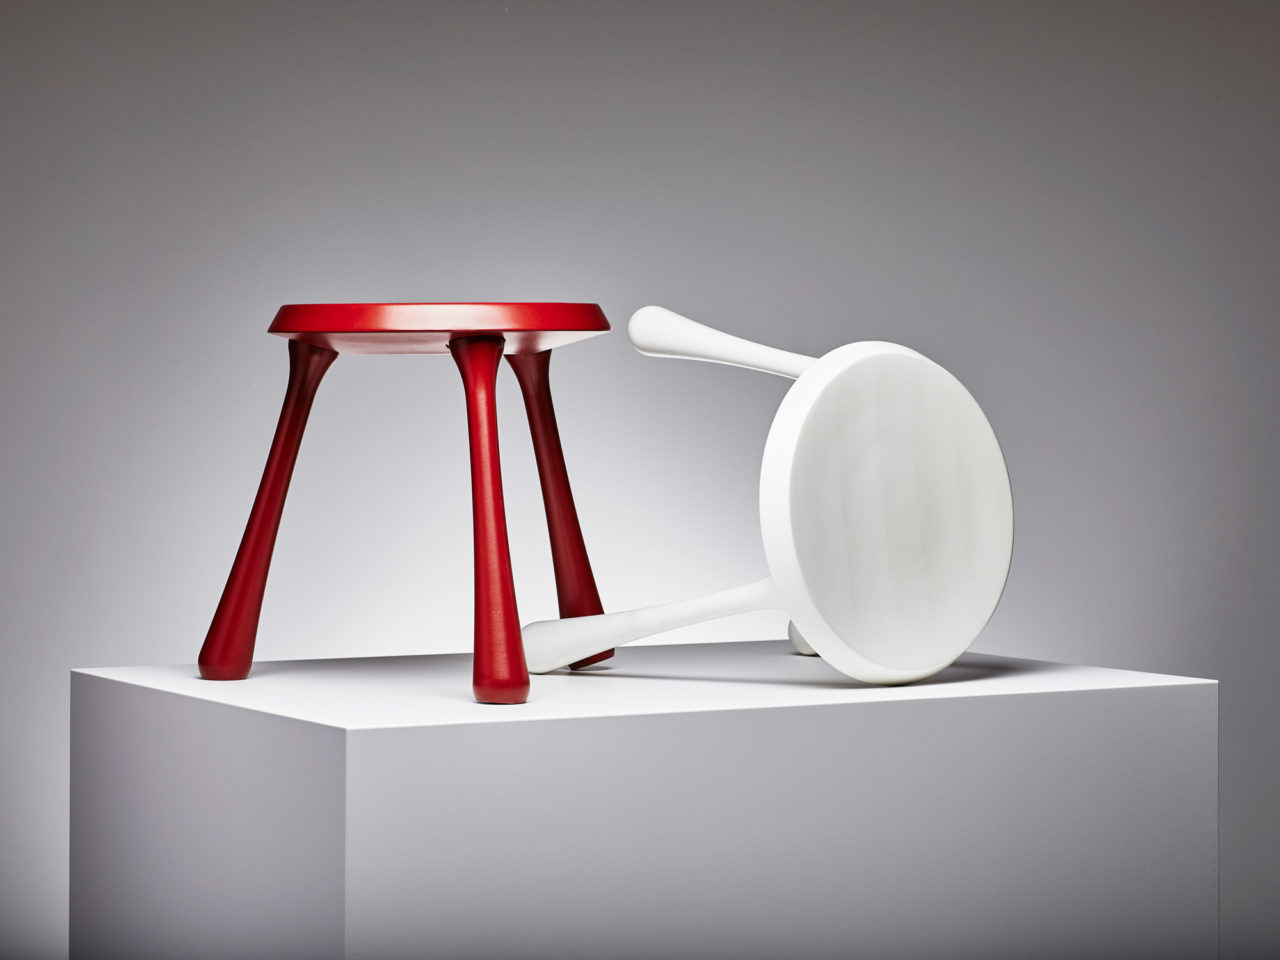 Two three-legged stools, one red, one white, on top of a white cube.